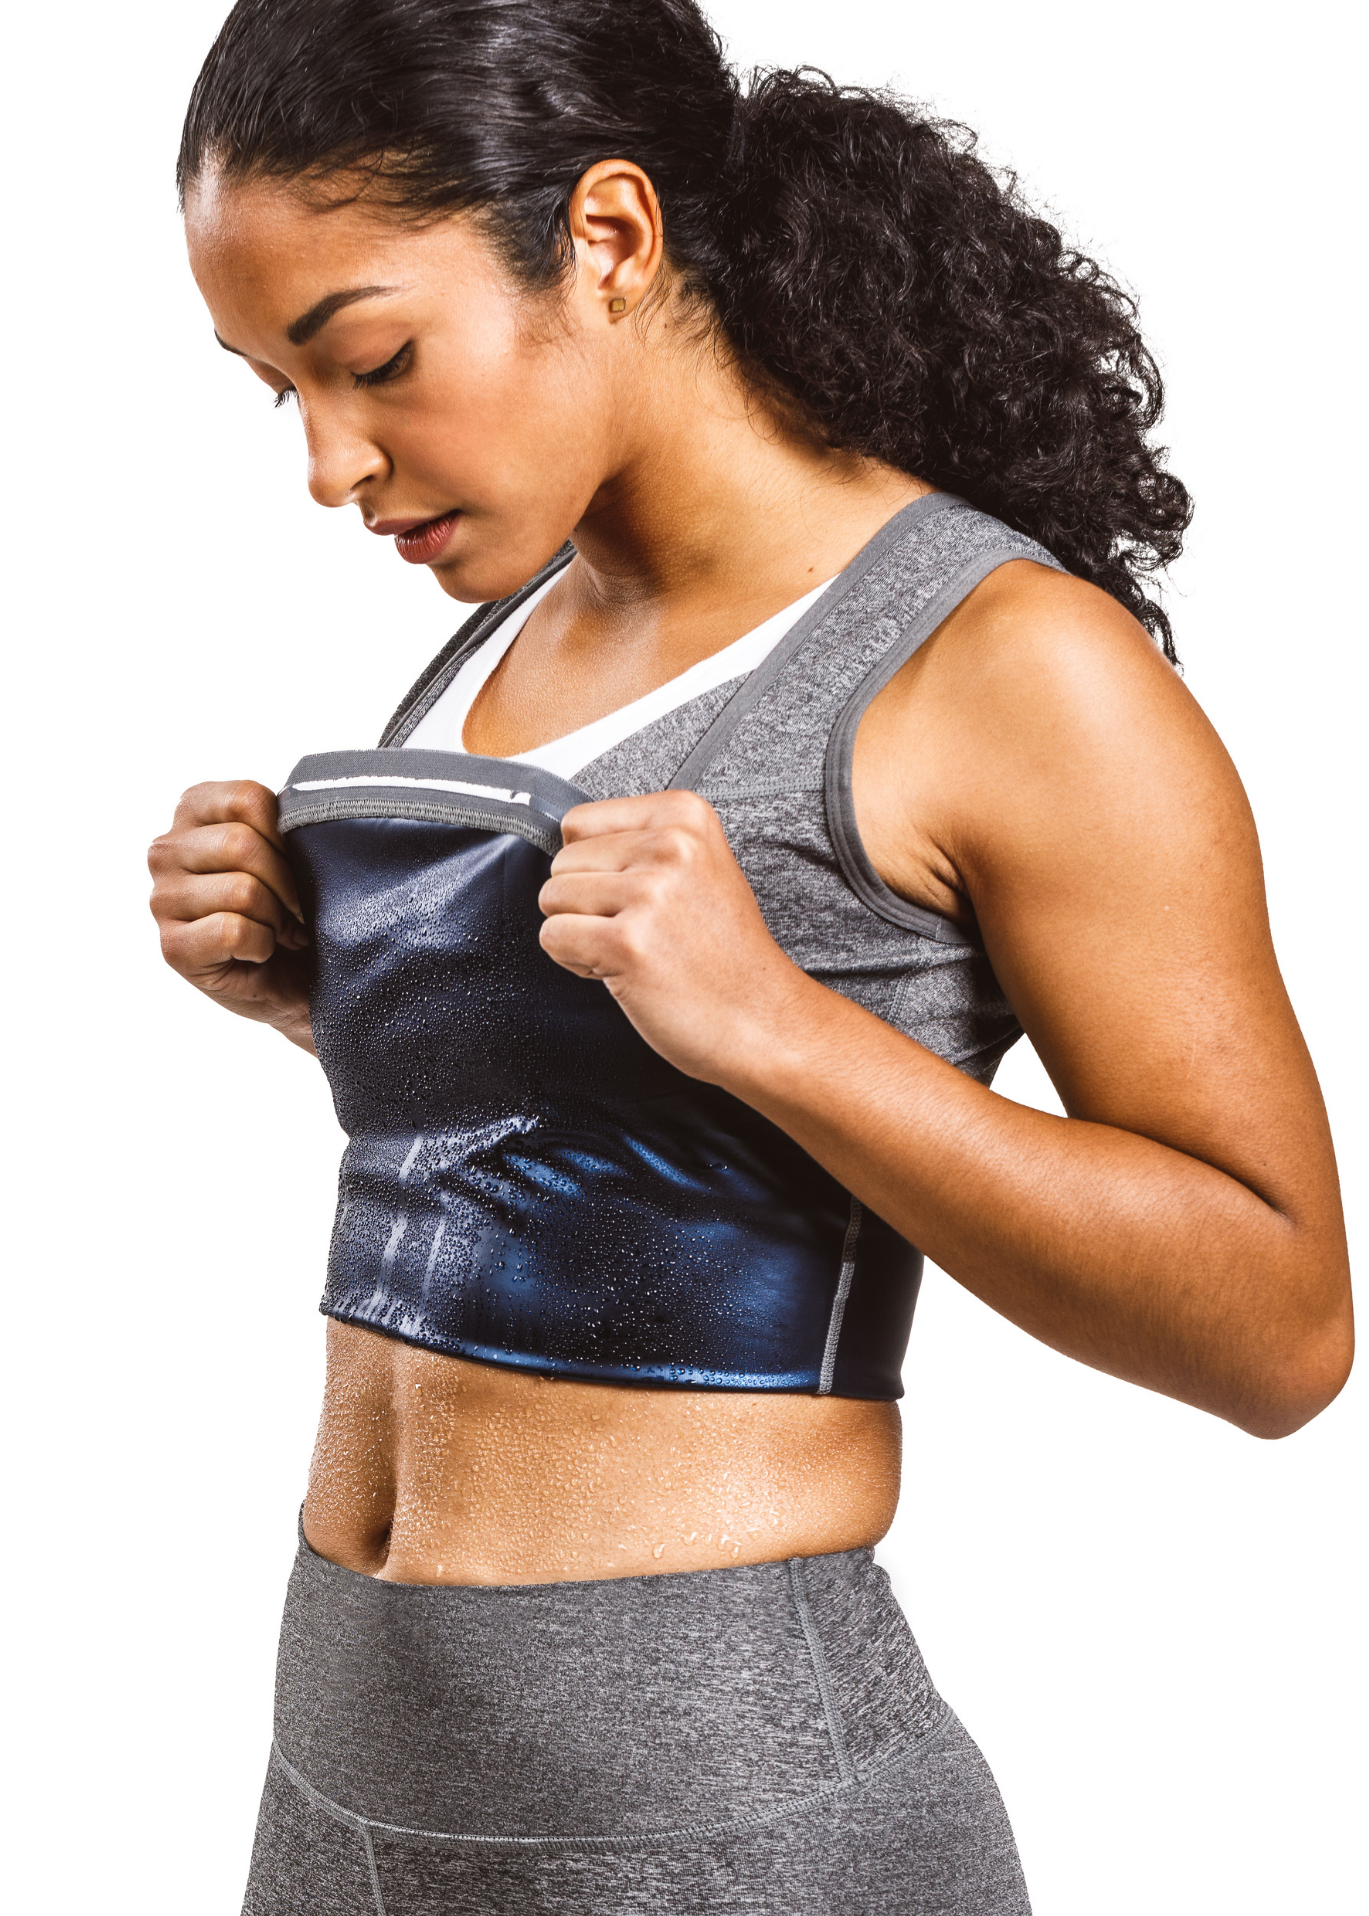 Sweat Shaper Review. Advanced Polymer Sweat Accelerating Technology